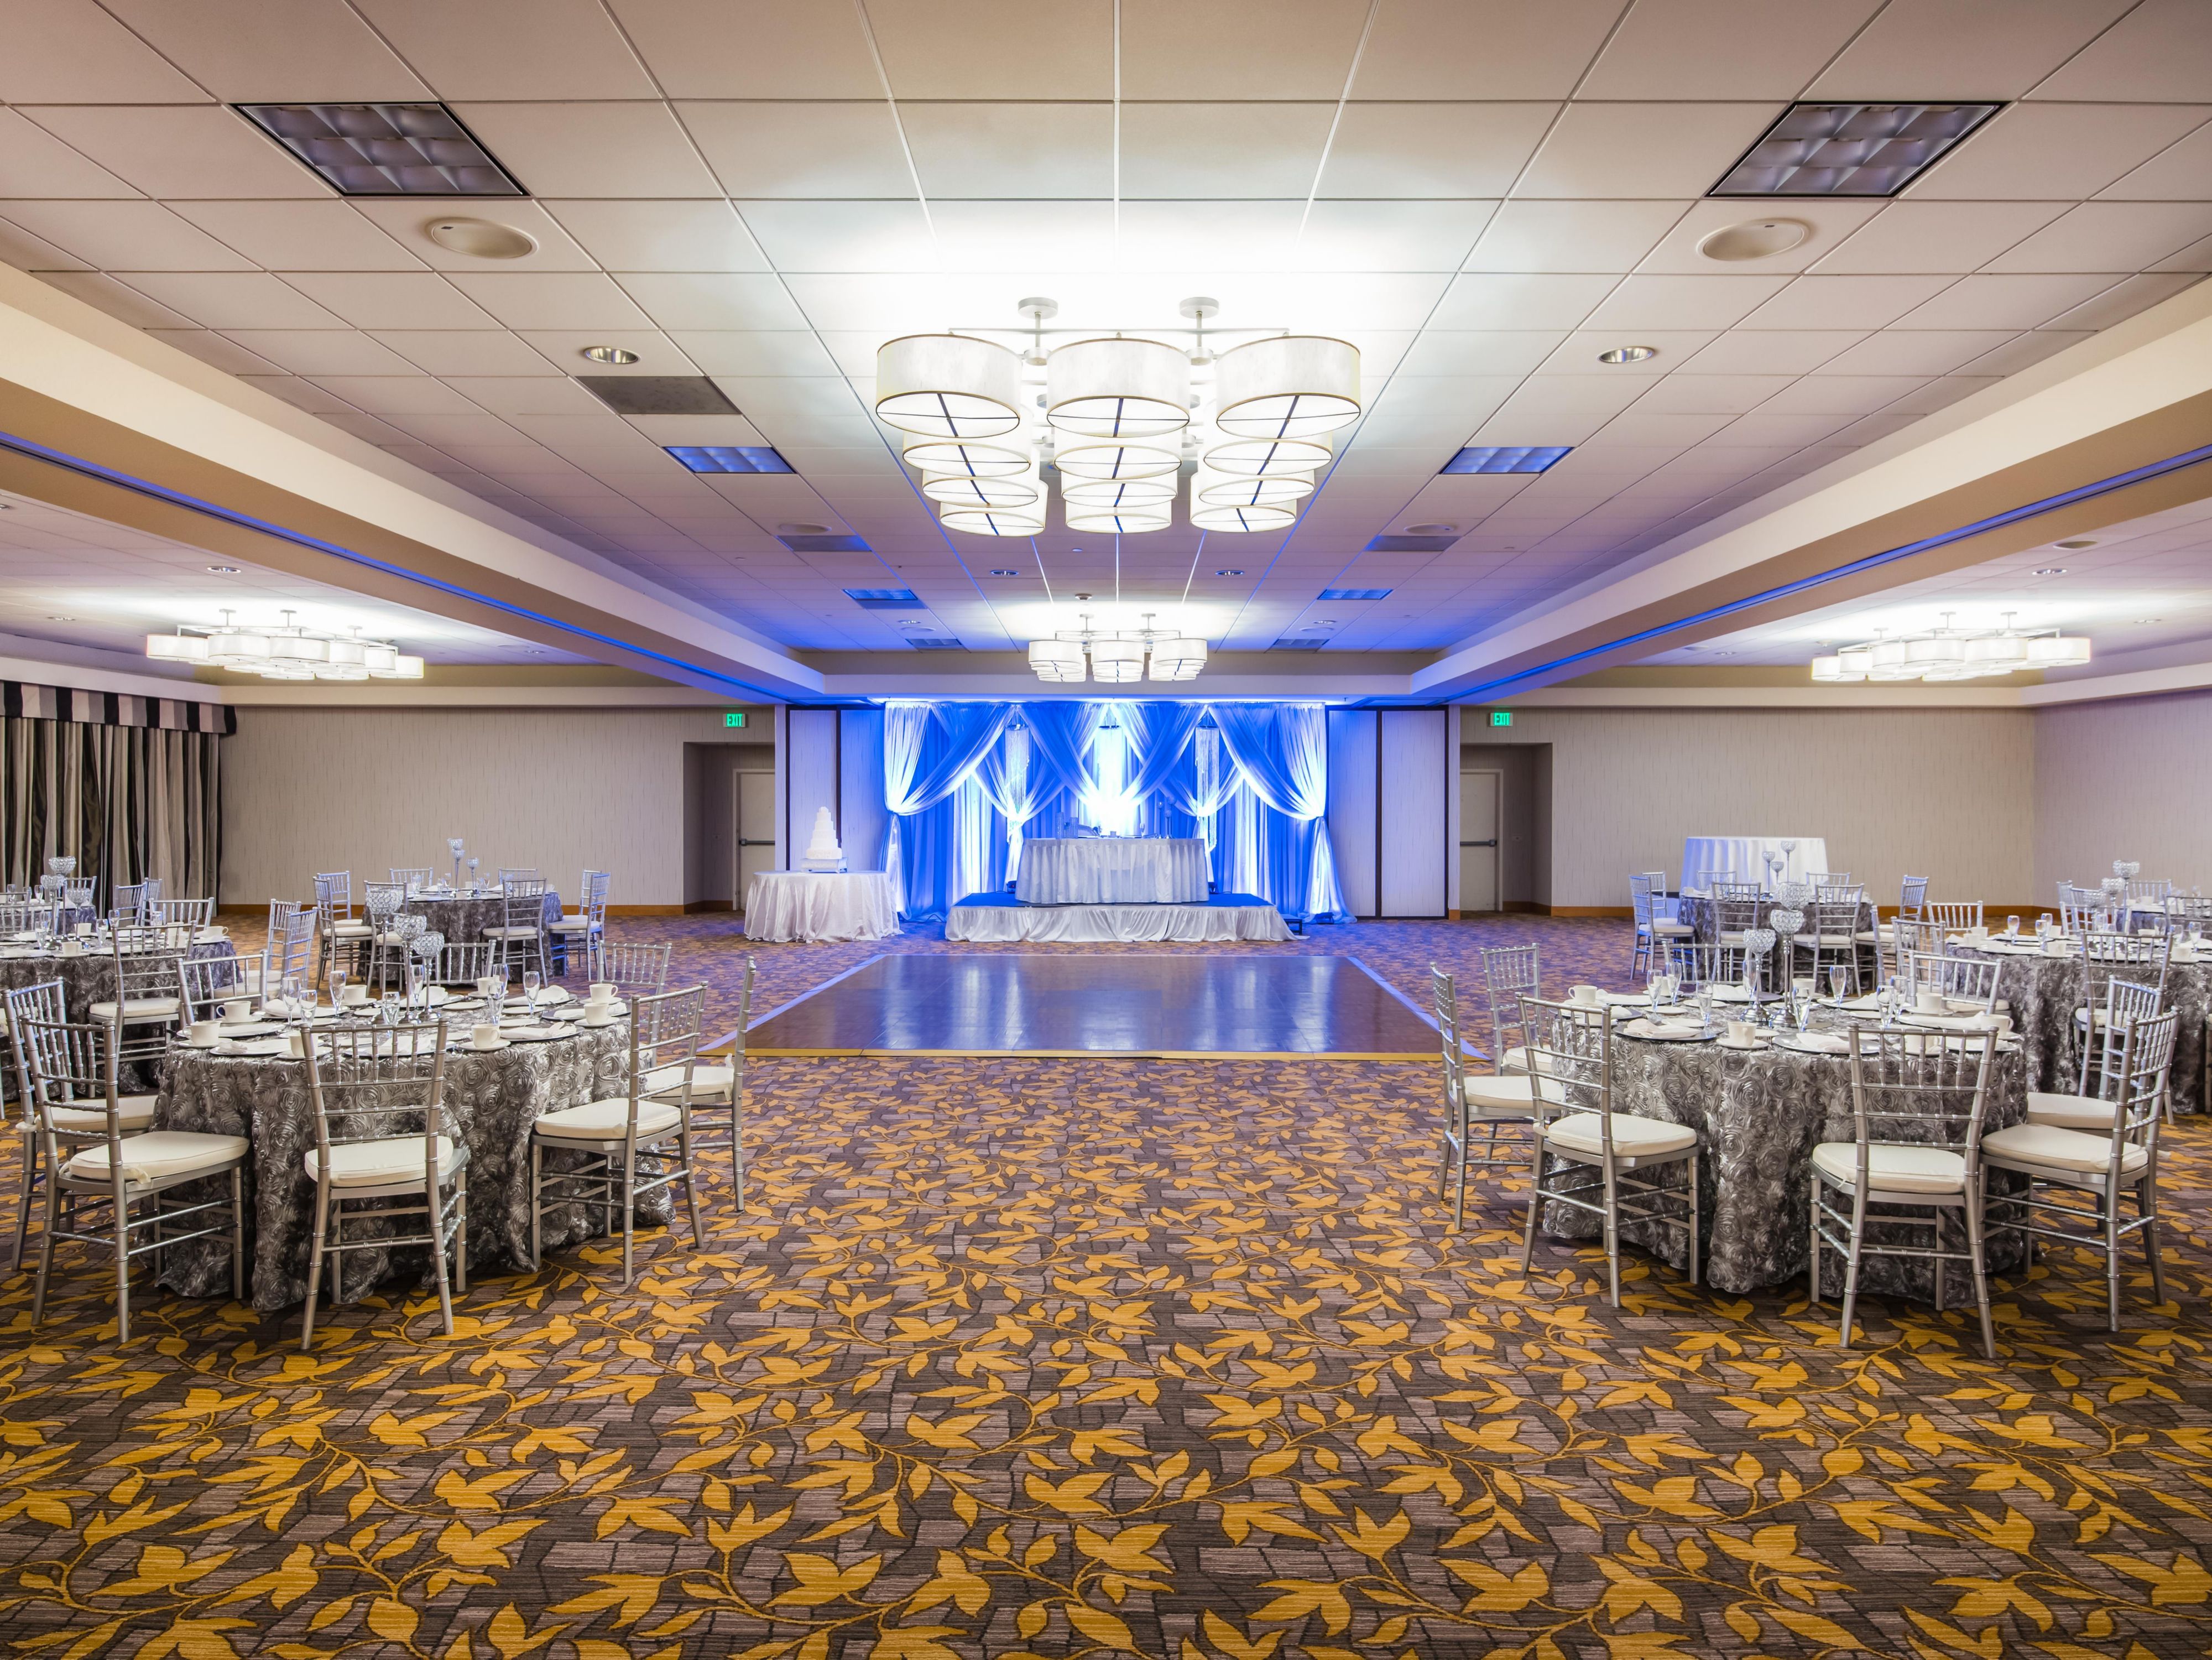 The Crowne Plaza San Francisco Airport is now booking special holiday promotions for events, Weddings, Holiday Parties, Quinceaneras, and Birthday Parties.